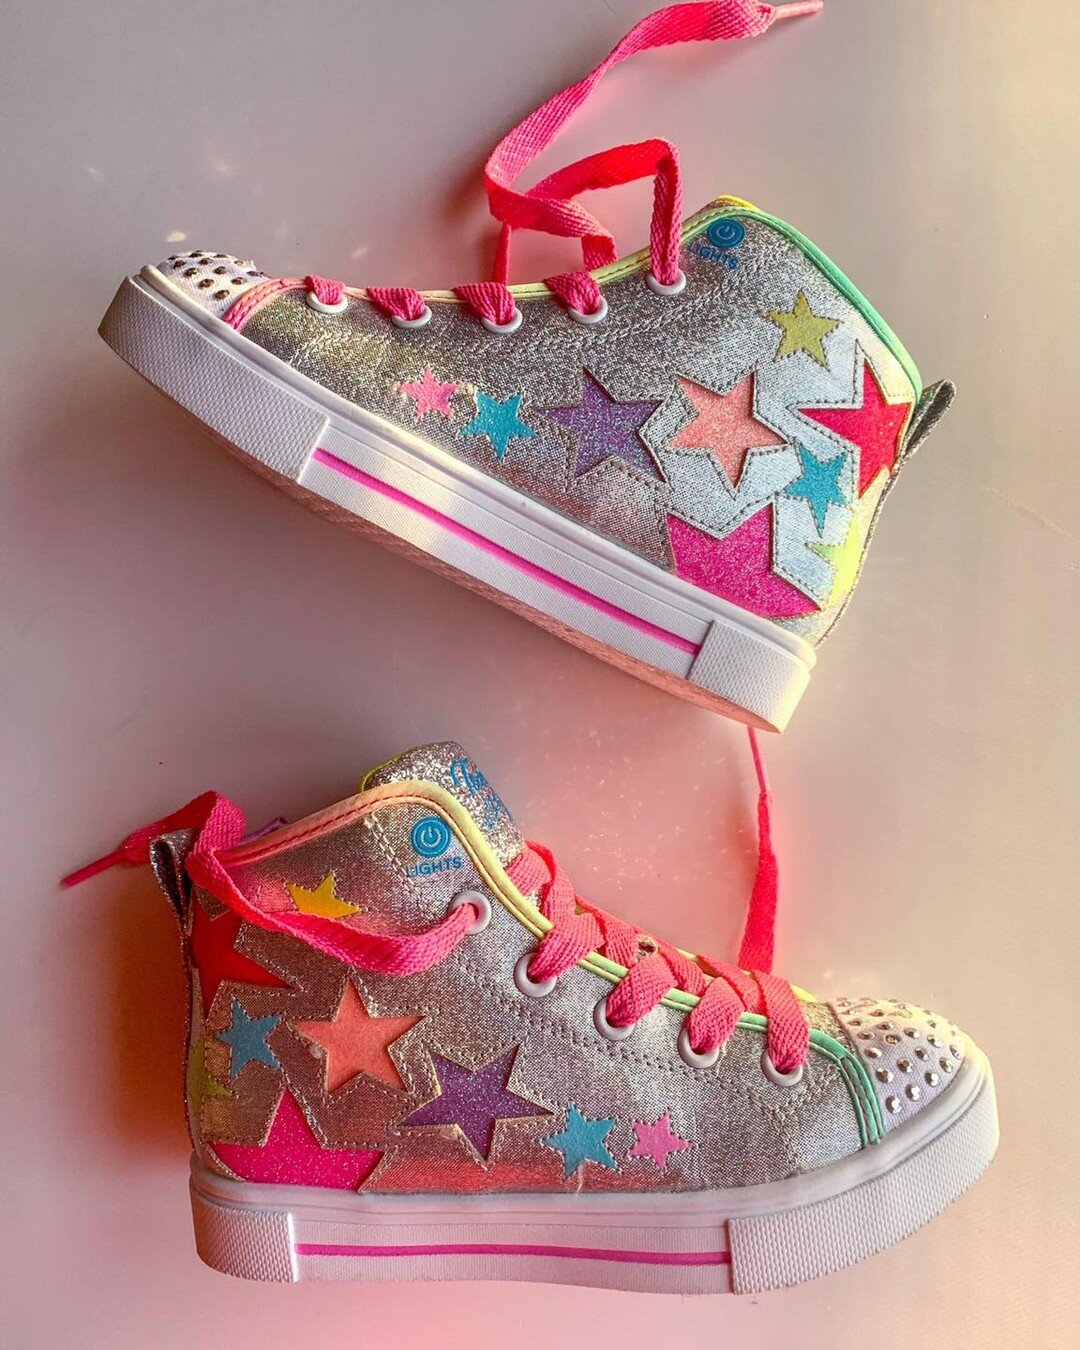 Not a fan of kids&rsquo; light up shoes&mdash;most of them are atrocious 😬. But when Brooklyn asked for a pair I was determined to find her the cutest ones possible. 

Enter these Twinkle Sparks light up hi top Sketchers that are actually cute! Perf